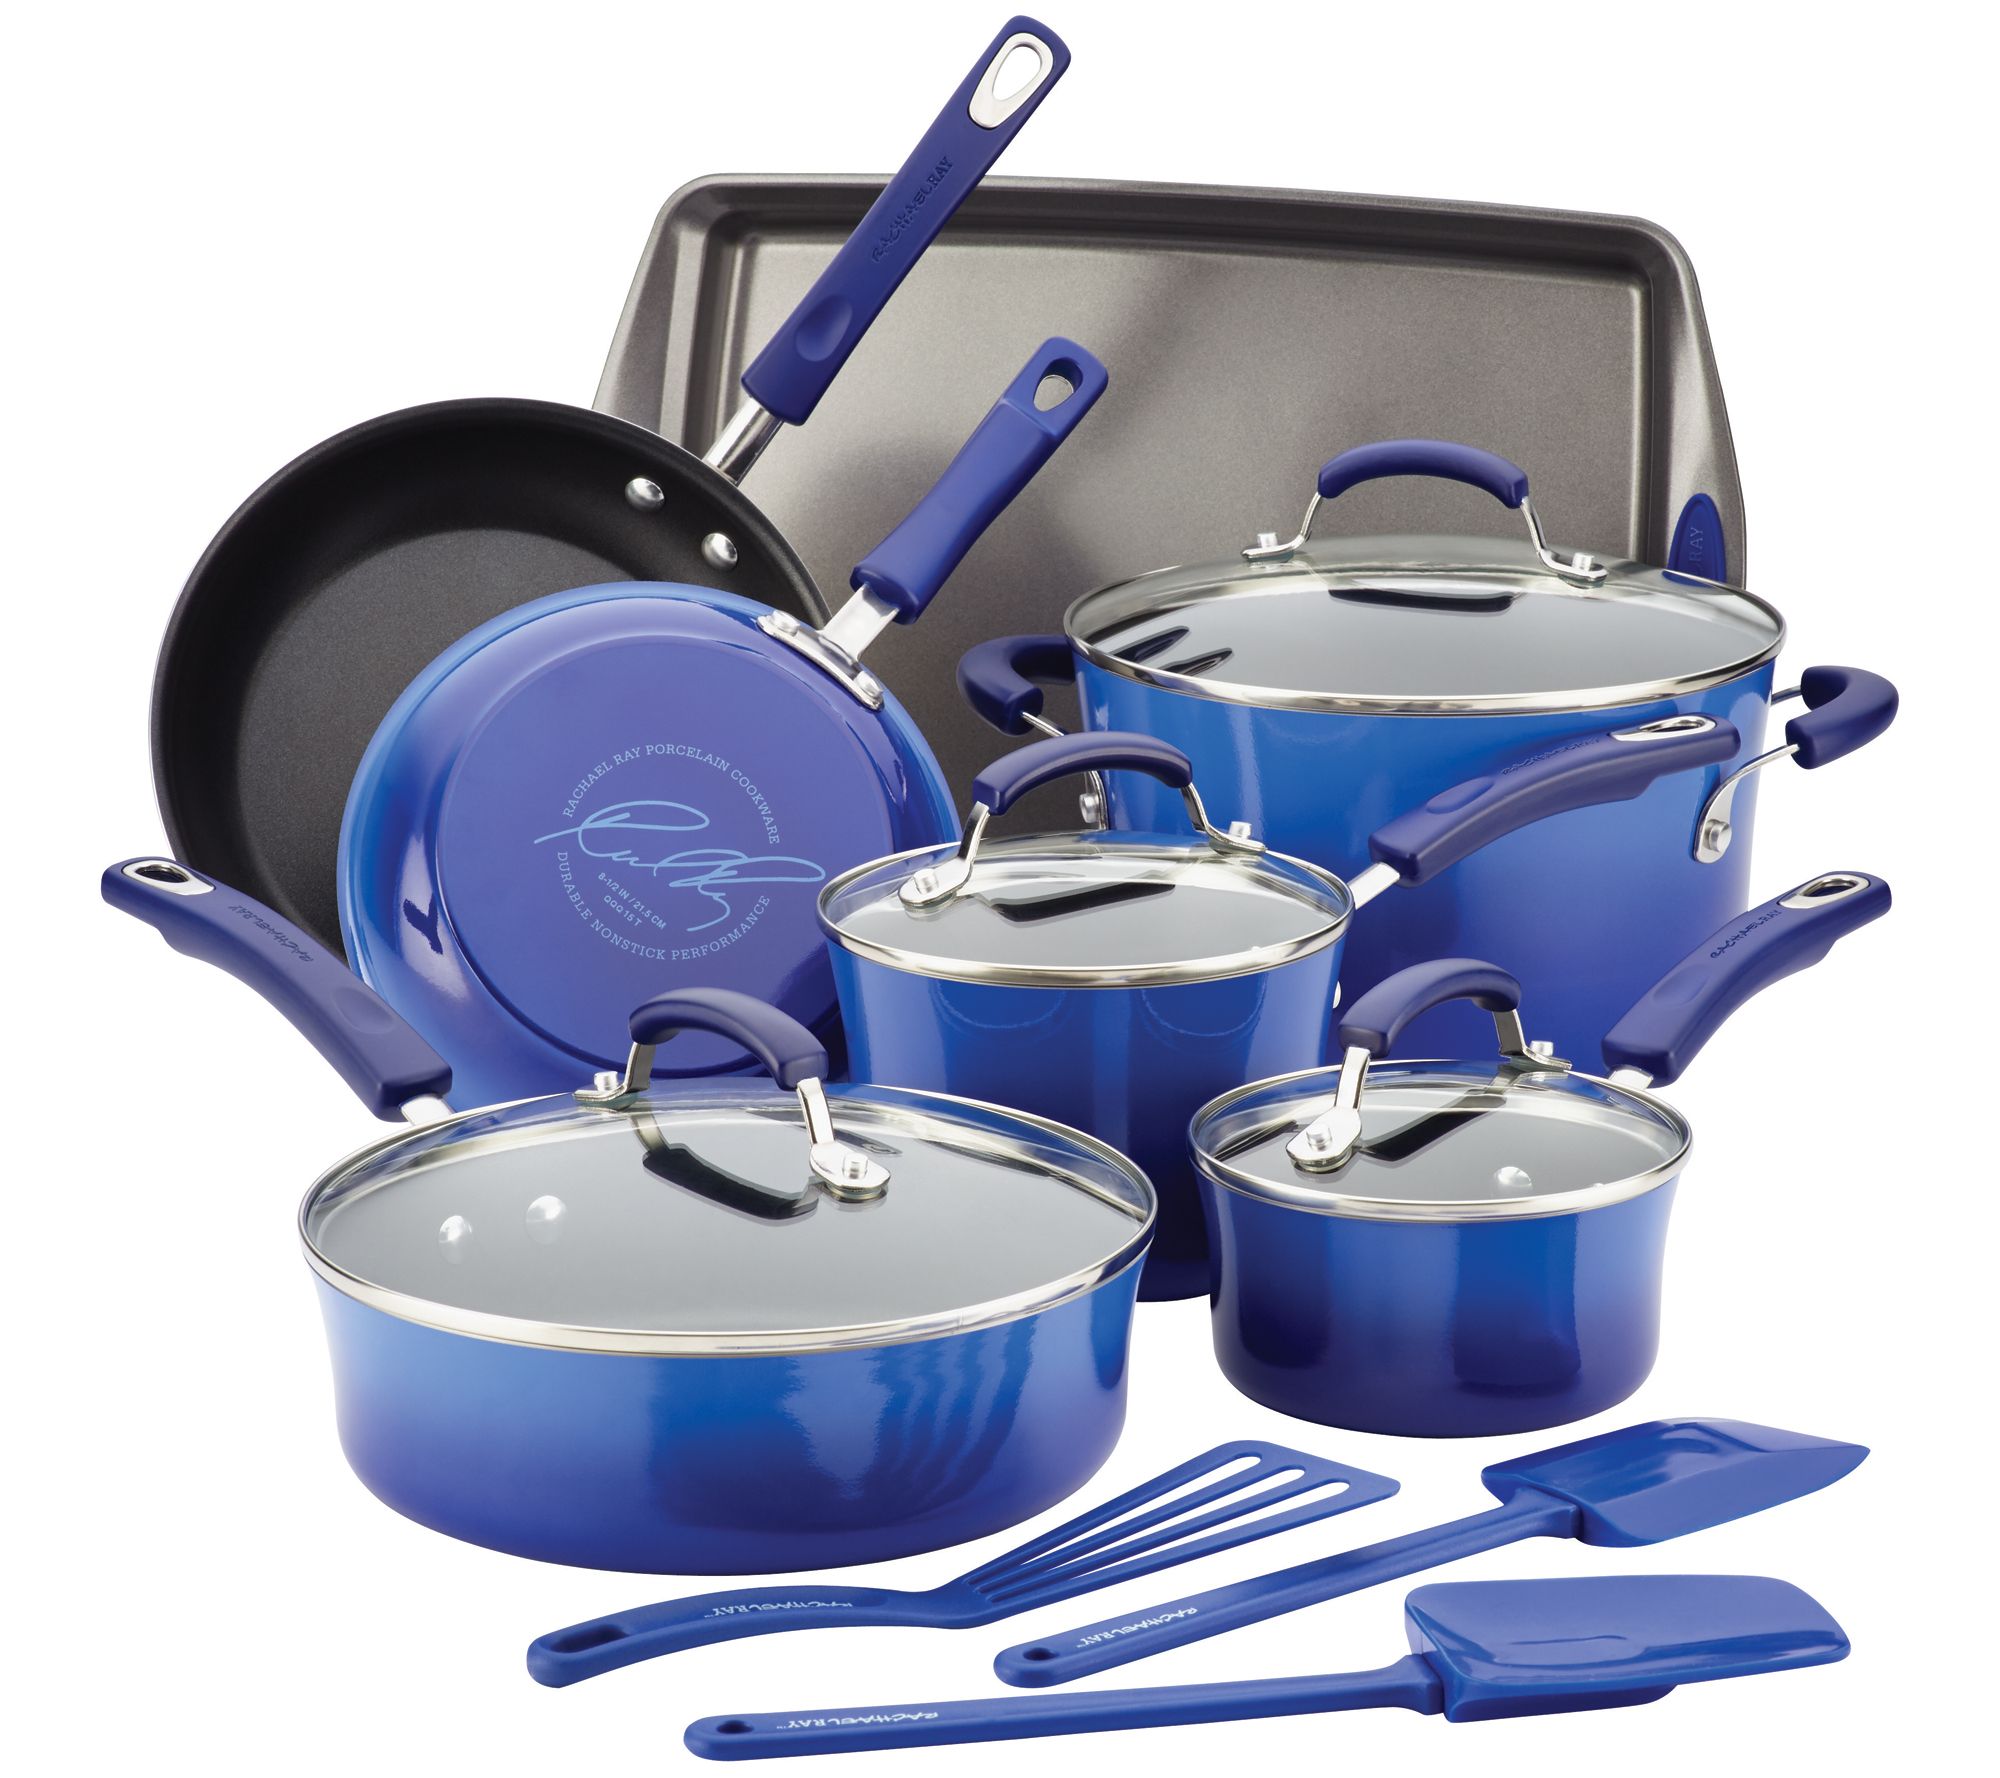 Rachael Ray Winter Clearance Sale: It's Your Last Chance to Get